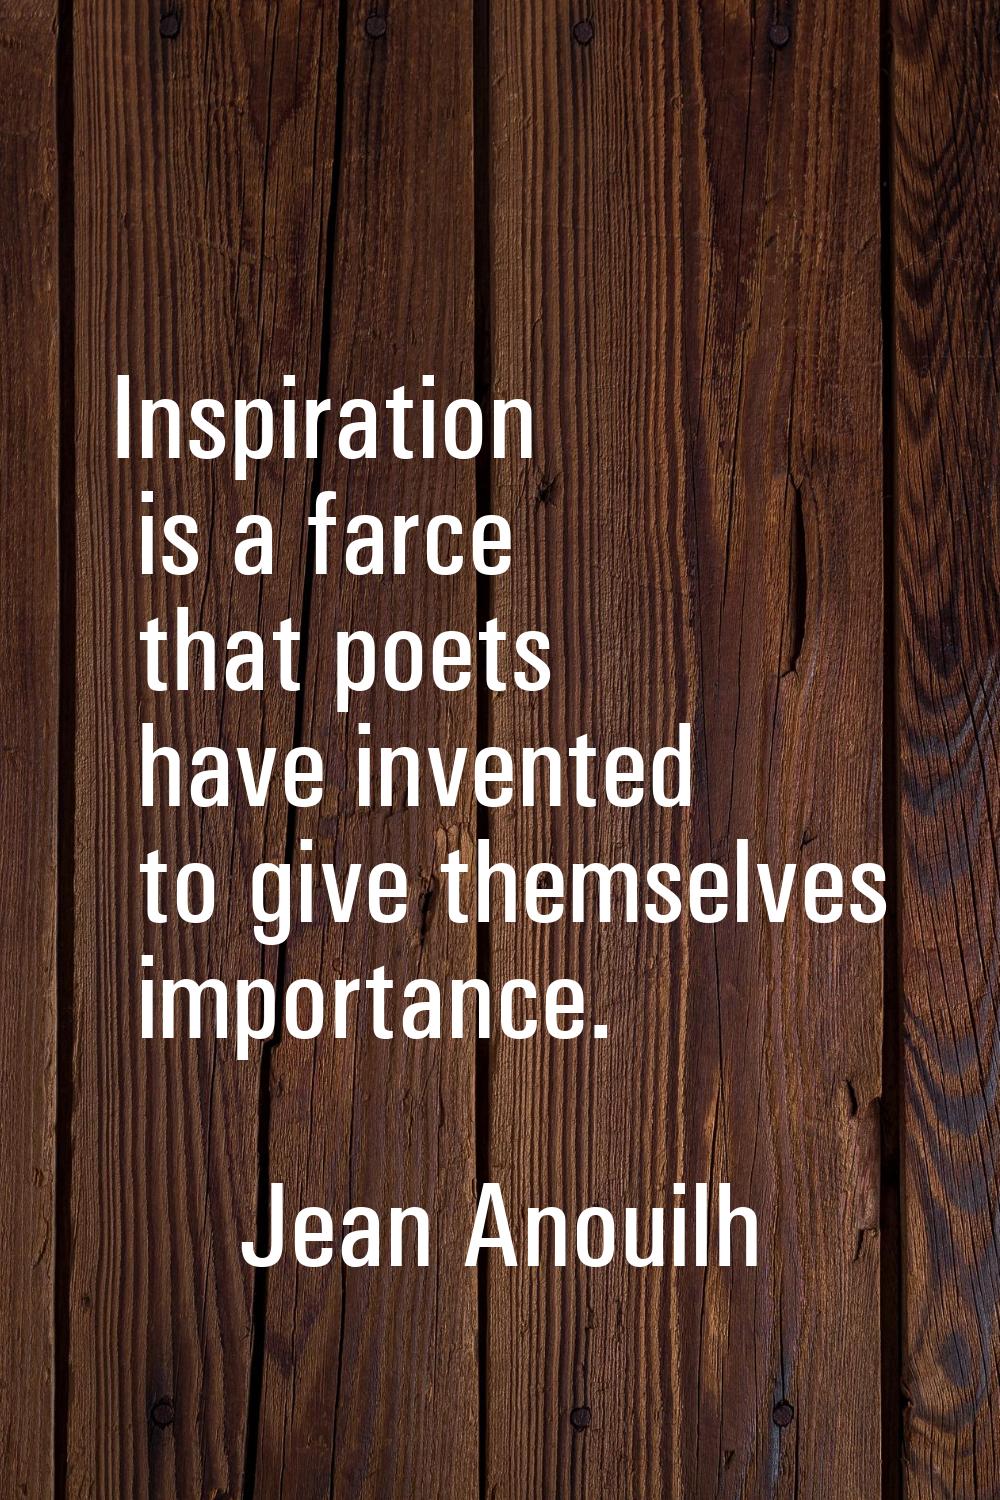 Inspiration is a farce that poets have invented to give themselves importance.